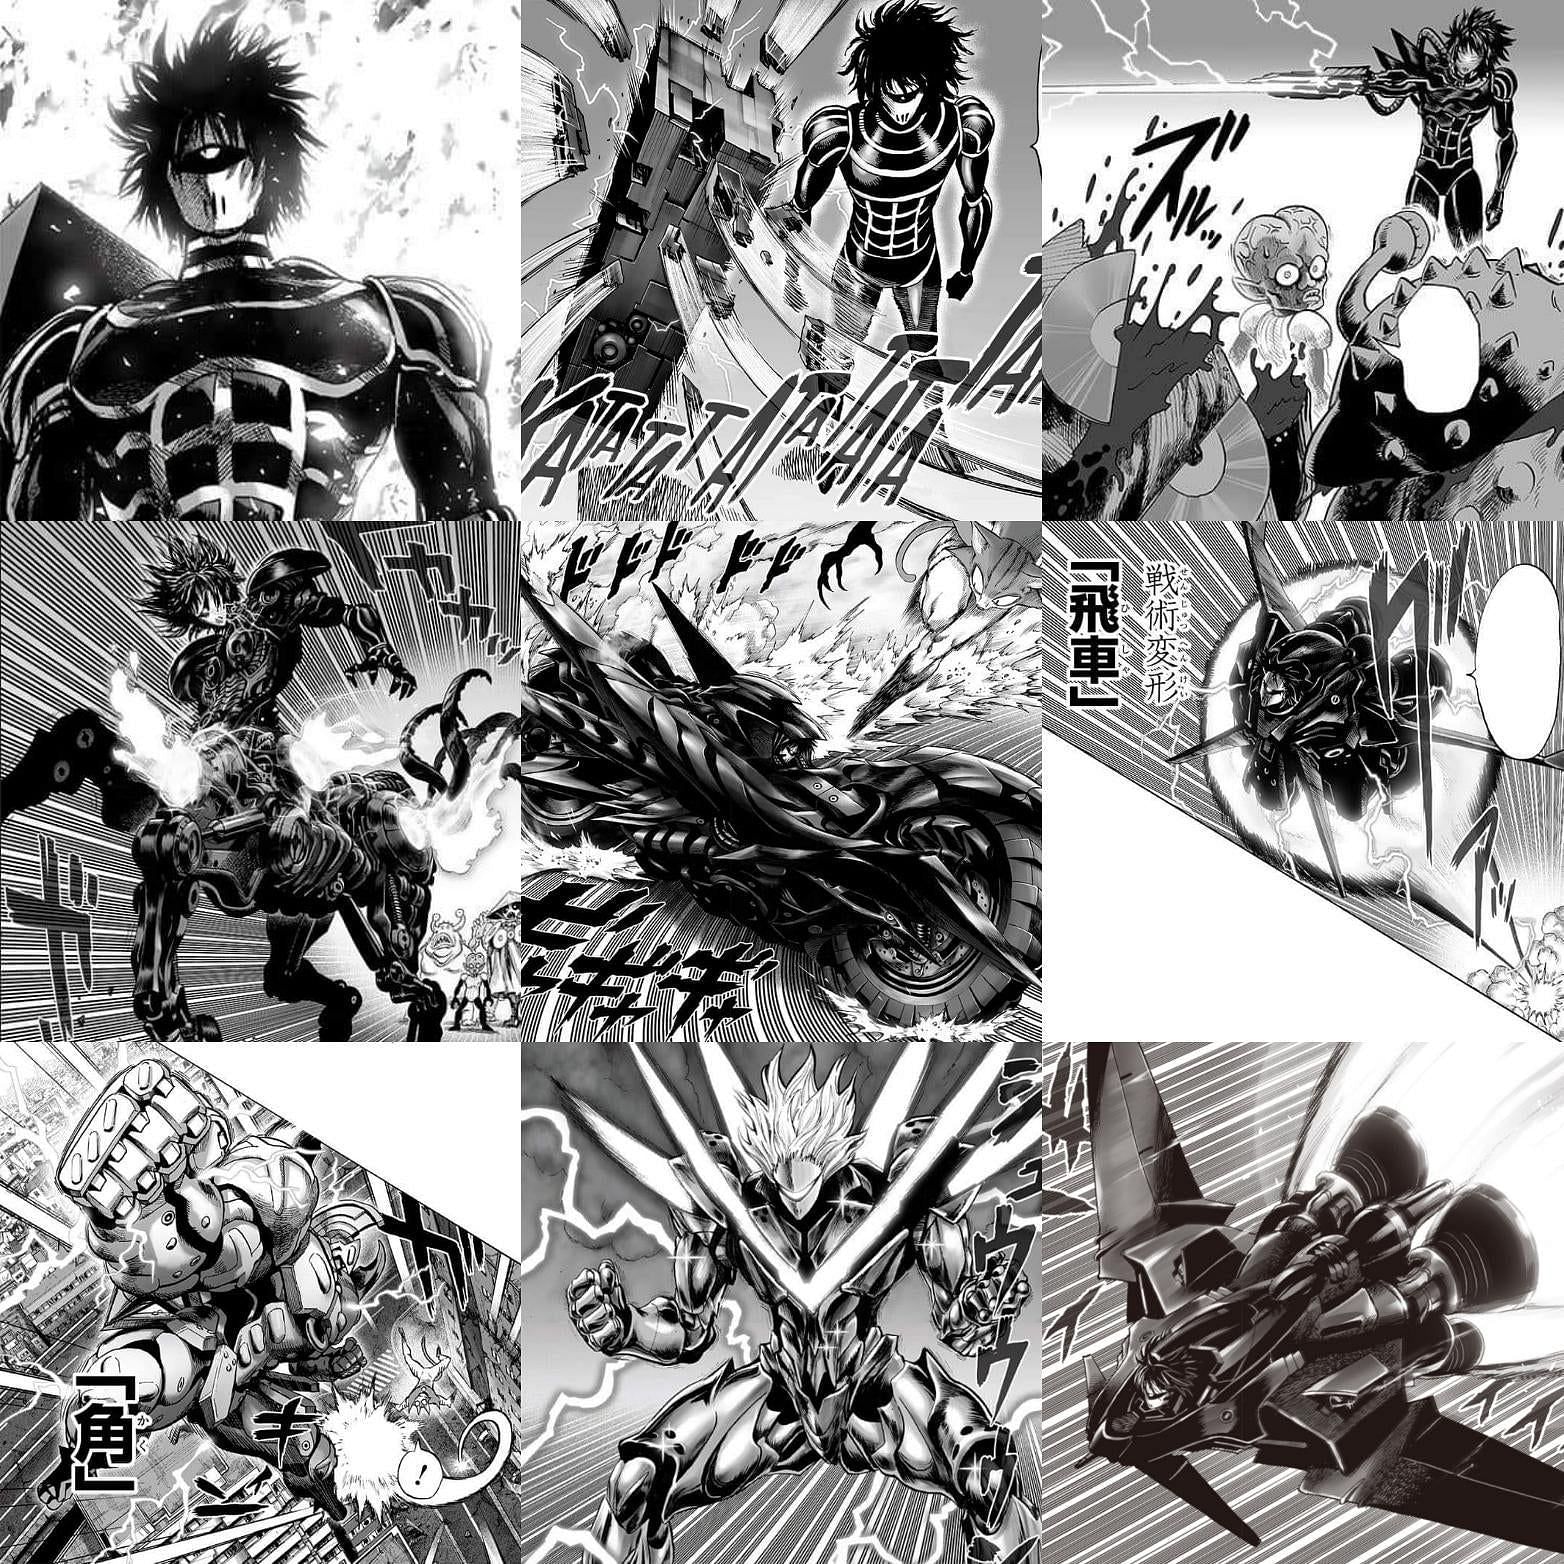 Drive Knight and his transformations in One Punch Man (image via Netflix)